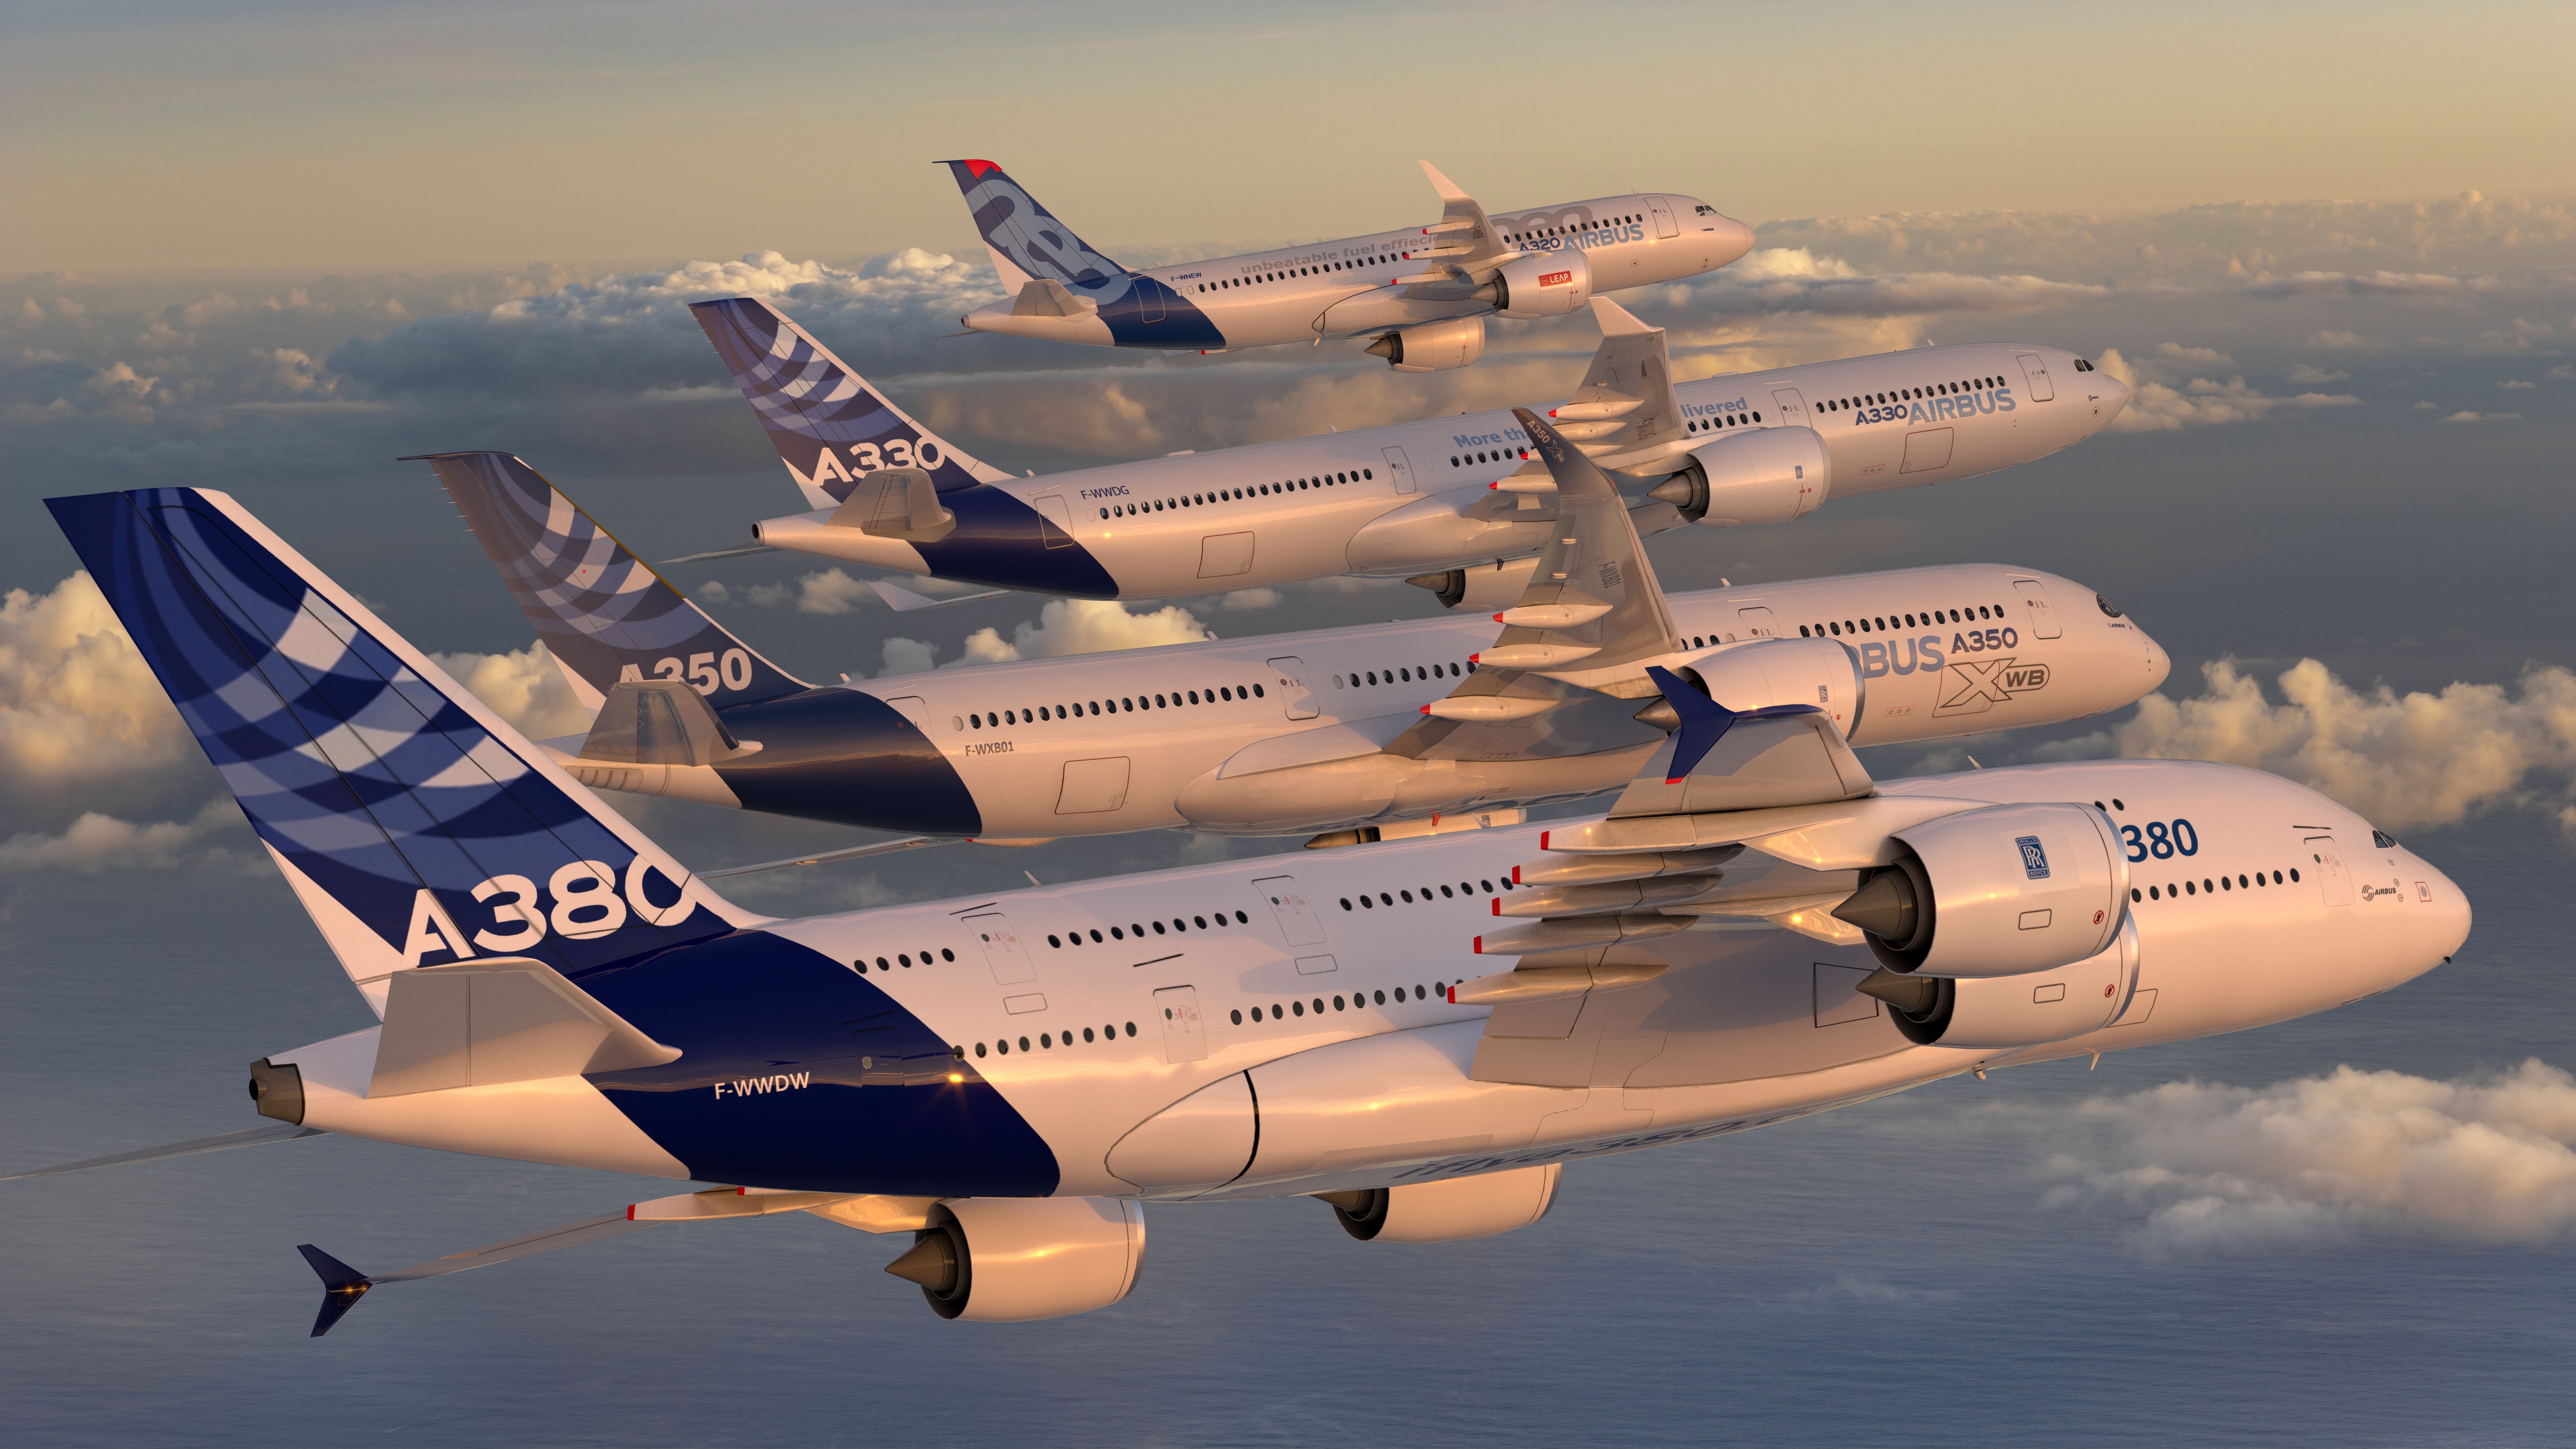 An Airbus A380, A350, A330, and A320 flying together